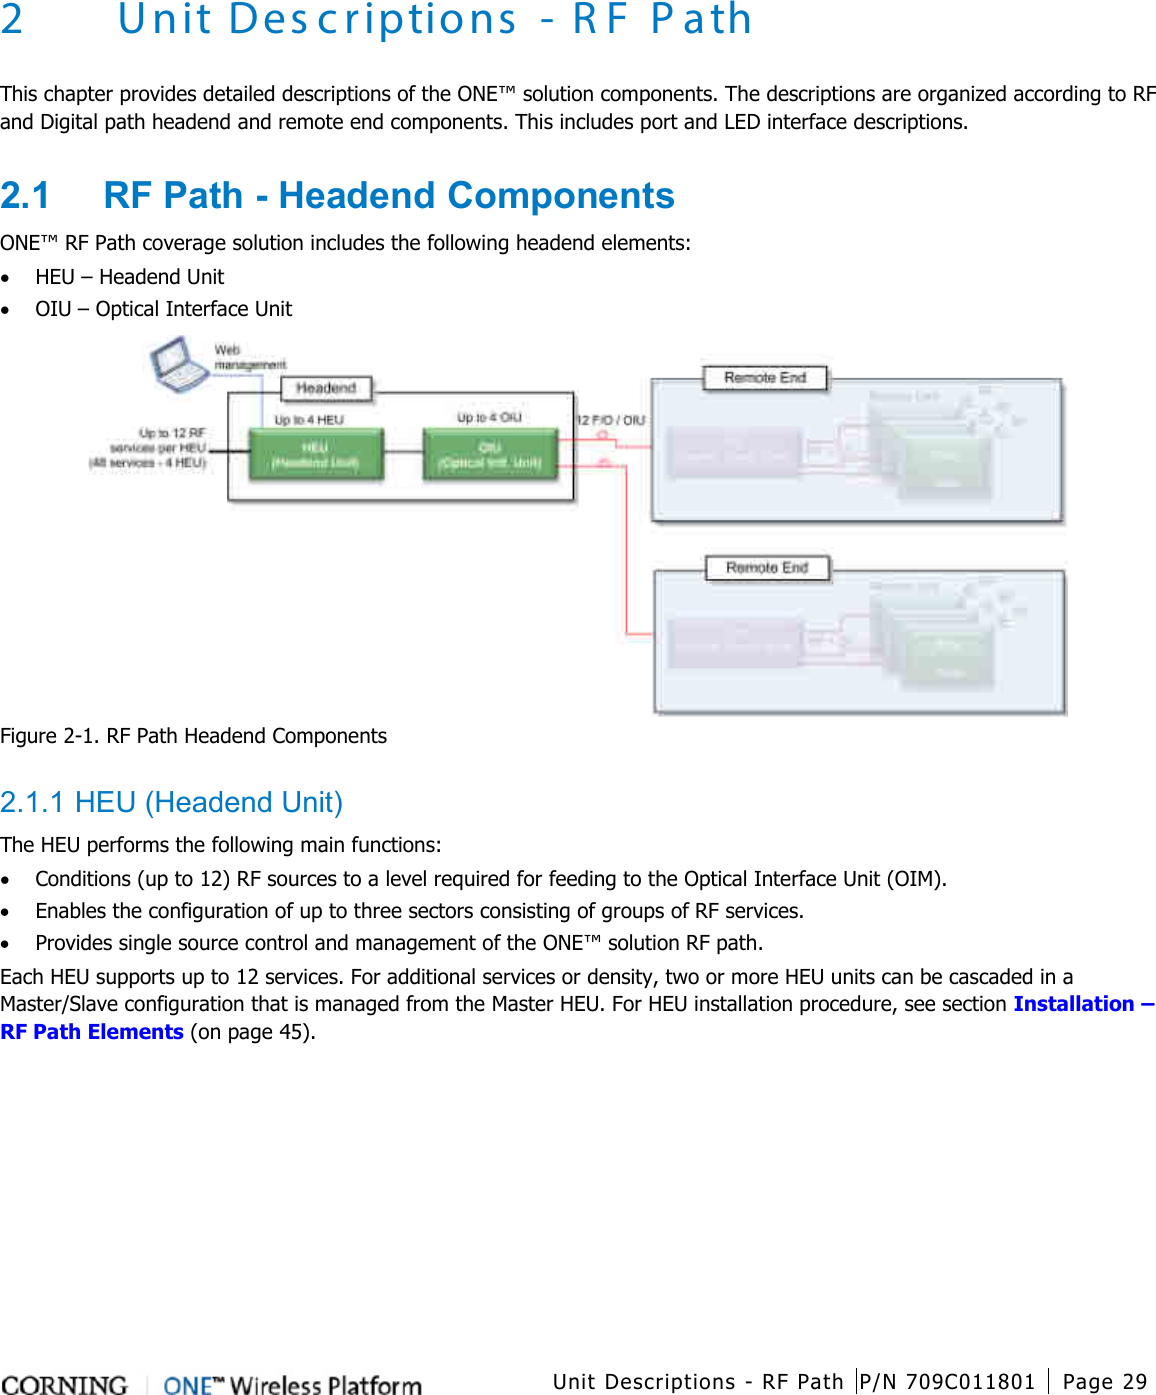   Unit Descriptions - RF Path P/N 709C011801 Page 29   2 Unit Descriptions - R F P ath This chapter provides detailed descriptions of the ONE™ solution components. The descriptions are organized according to RF and Digital path headend and remote end components. This includes port and LED interface descriptions. 2.1  RF Path - Headend Components ONE™ RF Path coverage solution includes the following headend elements: • HEU – Headend Unit   • OIU – Optical Interface Unit    Figure  2-1. RF Path Headend Components  2.1.1 HEU (Headend Unit) The HEU performs the following main functions: • Conditions (up to 12) RF sources to a level required for feeding to the Optical Interface Unit (OIM).   • Enables the configuration of up to three sectors consisting of groups of RF services. • Provides single source control and management of the ONE™ solution RF path. Each HEU supports up to 12 services. For additional services or density, two or more HEU units can be cascaded in a Master/Slave configuration that is managed from the Master HEU. For HEU installation procedure, see section Installation – RF Path Elements (on page 45). 